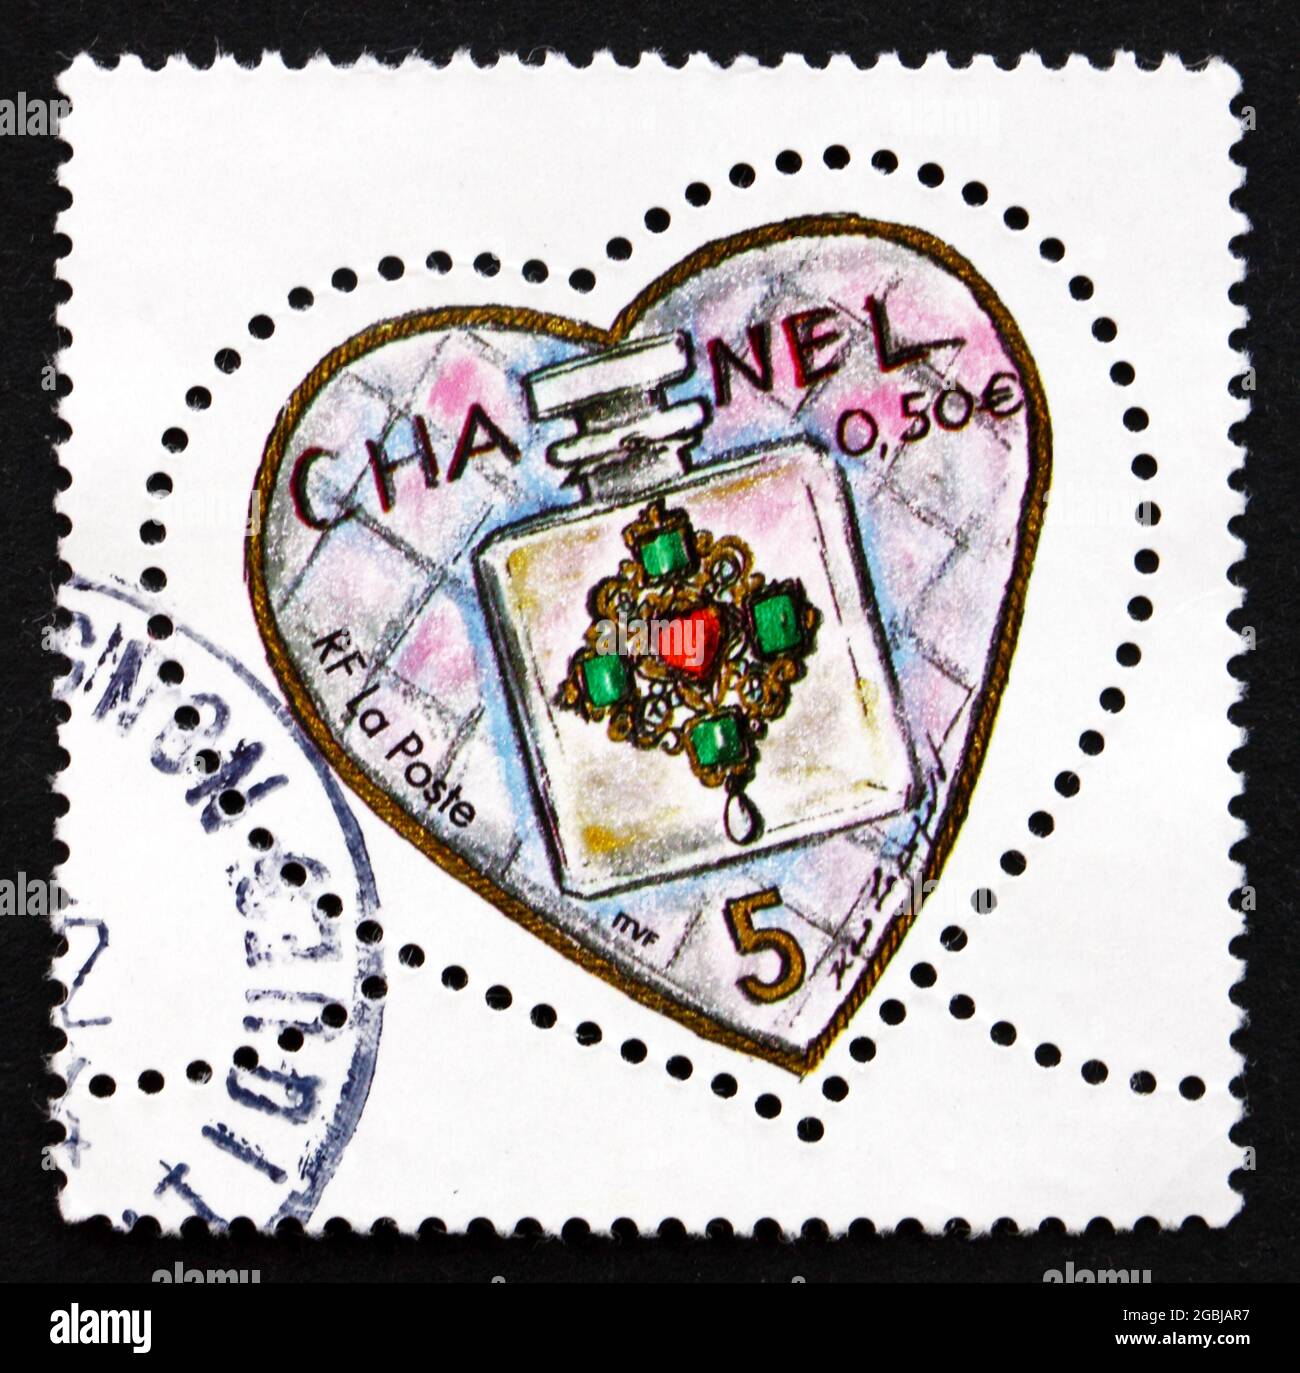 FRANCE - CIRCA 2004: a stamp printed in the France shows Chanel No. 5 Perfume Bottle, Valentine’s Day, Heart, circa 2004 Stock Photo